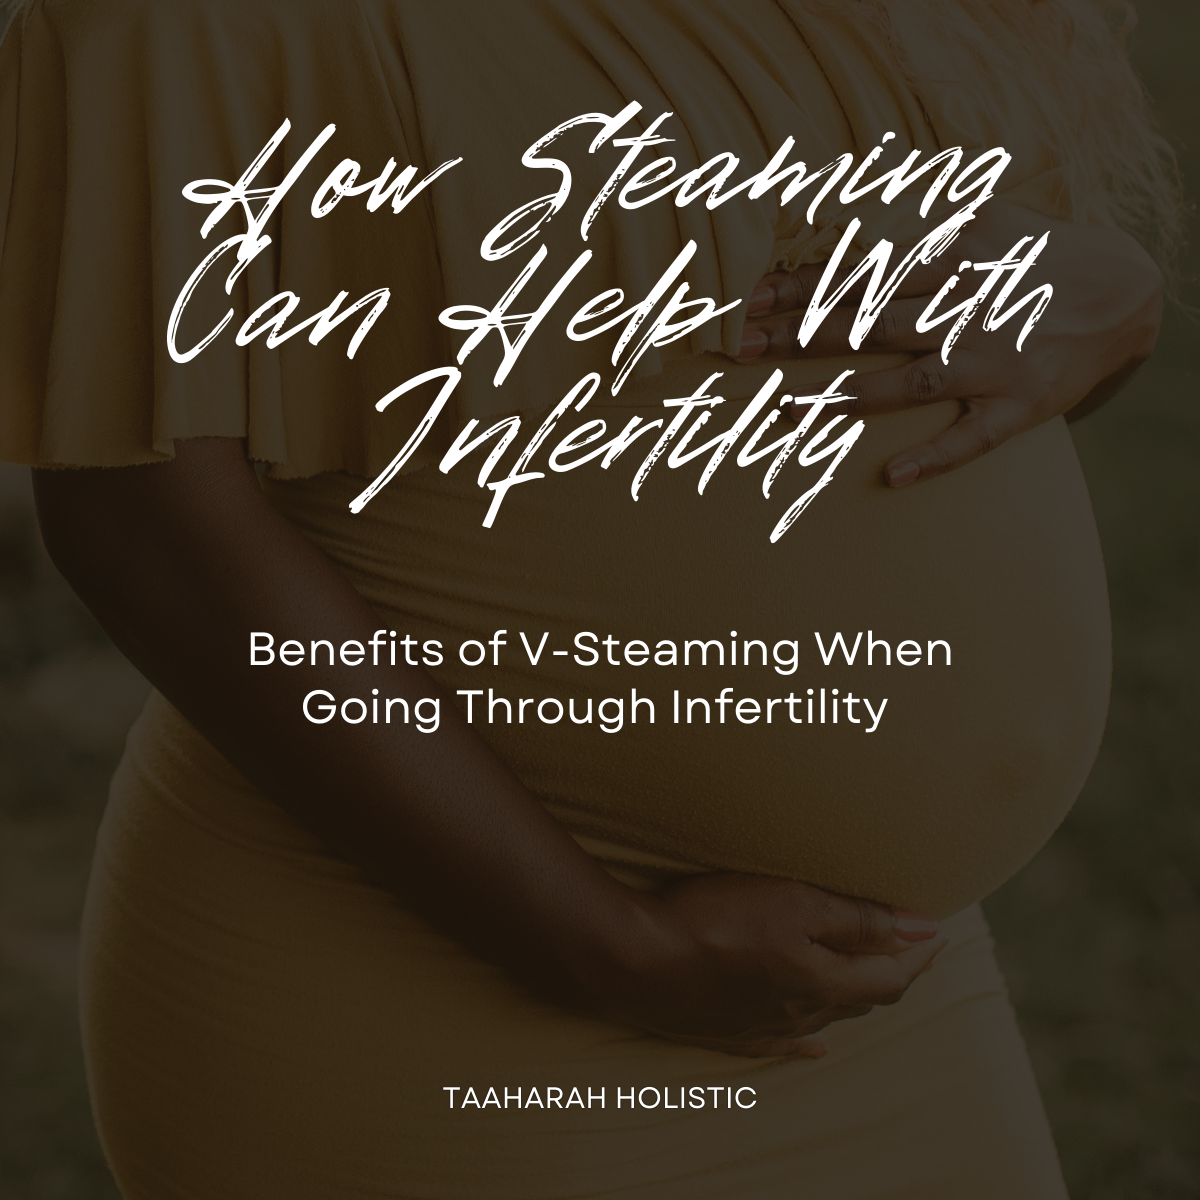 How Steaming Can Help With Infertility